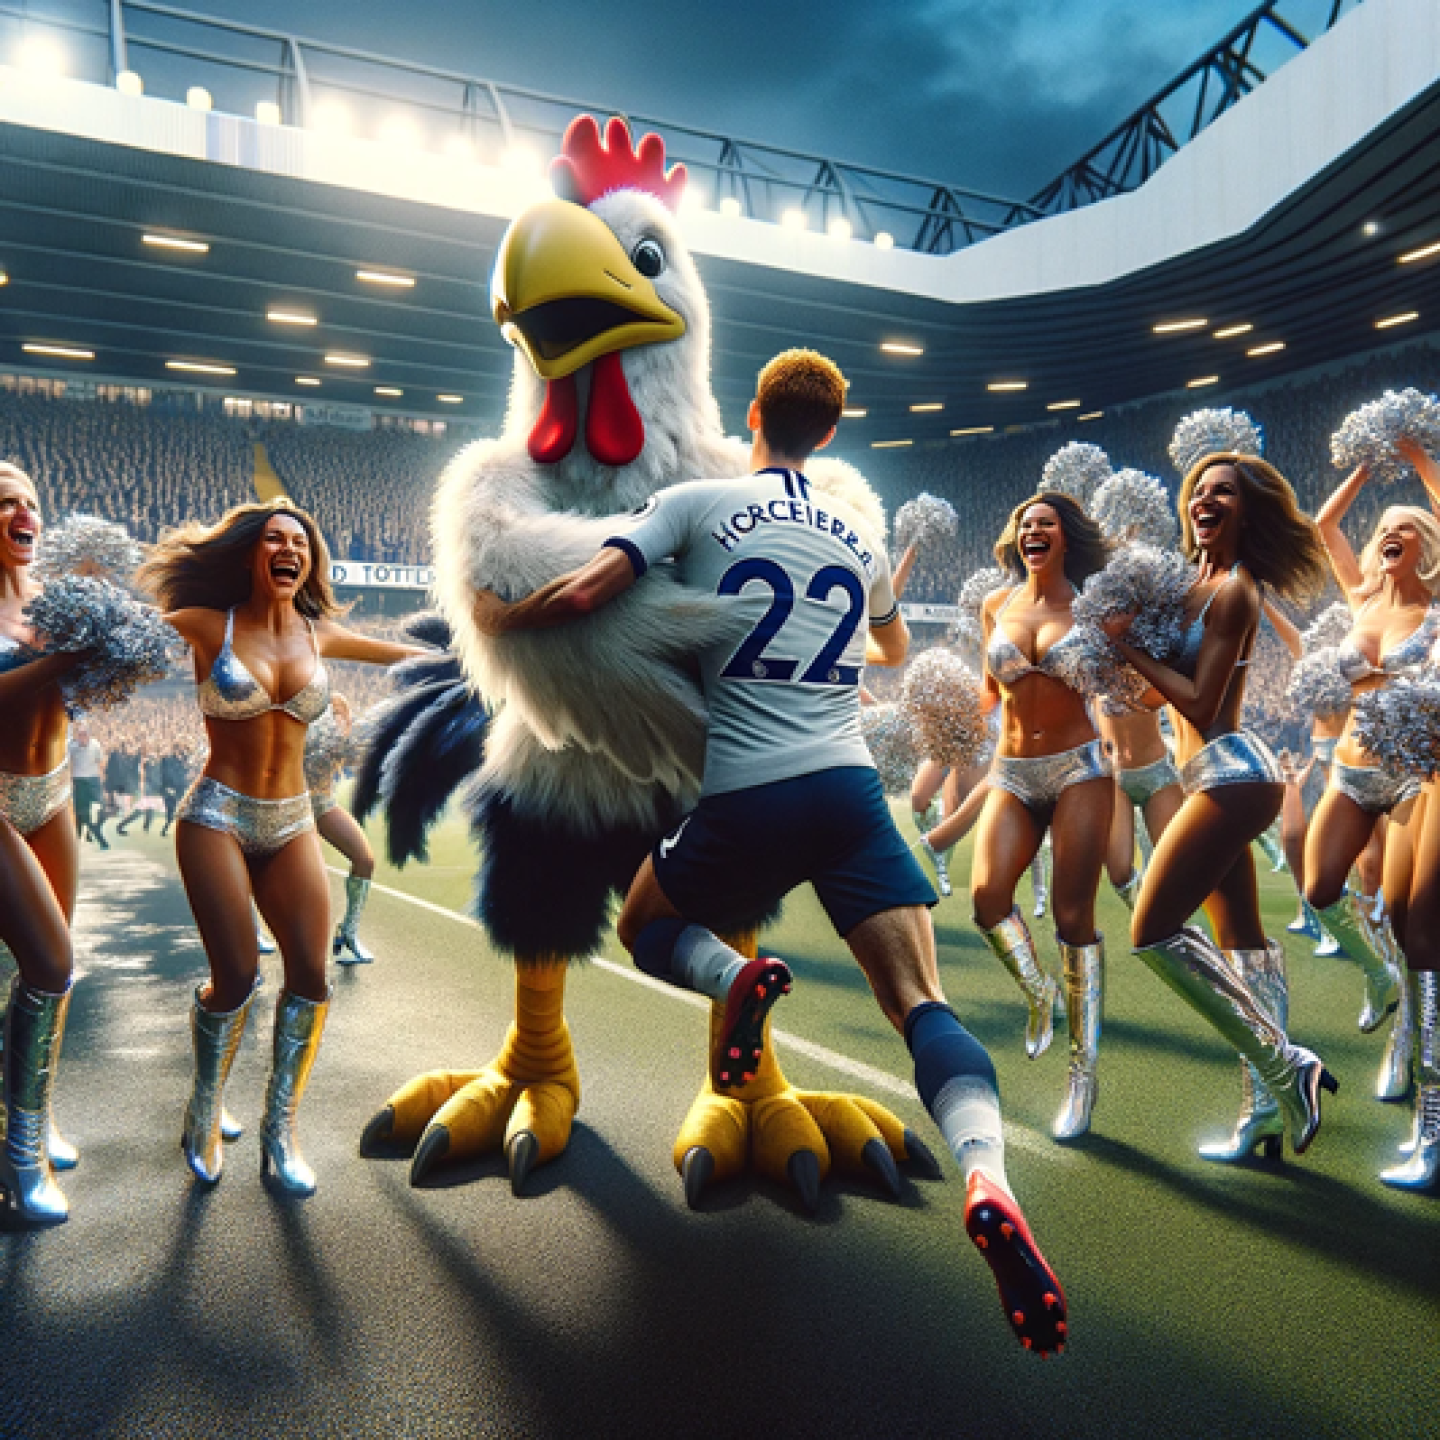 Spurs with Cockerel